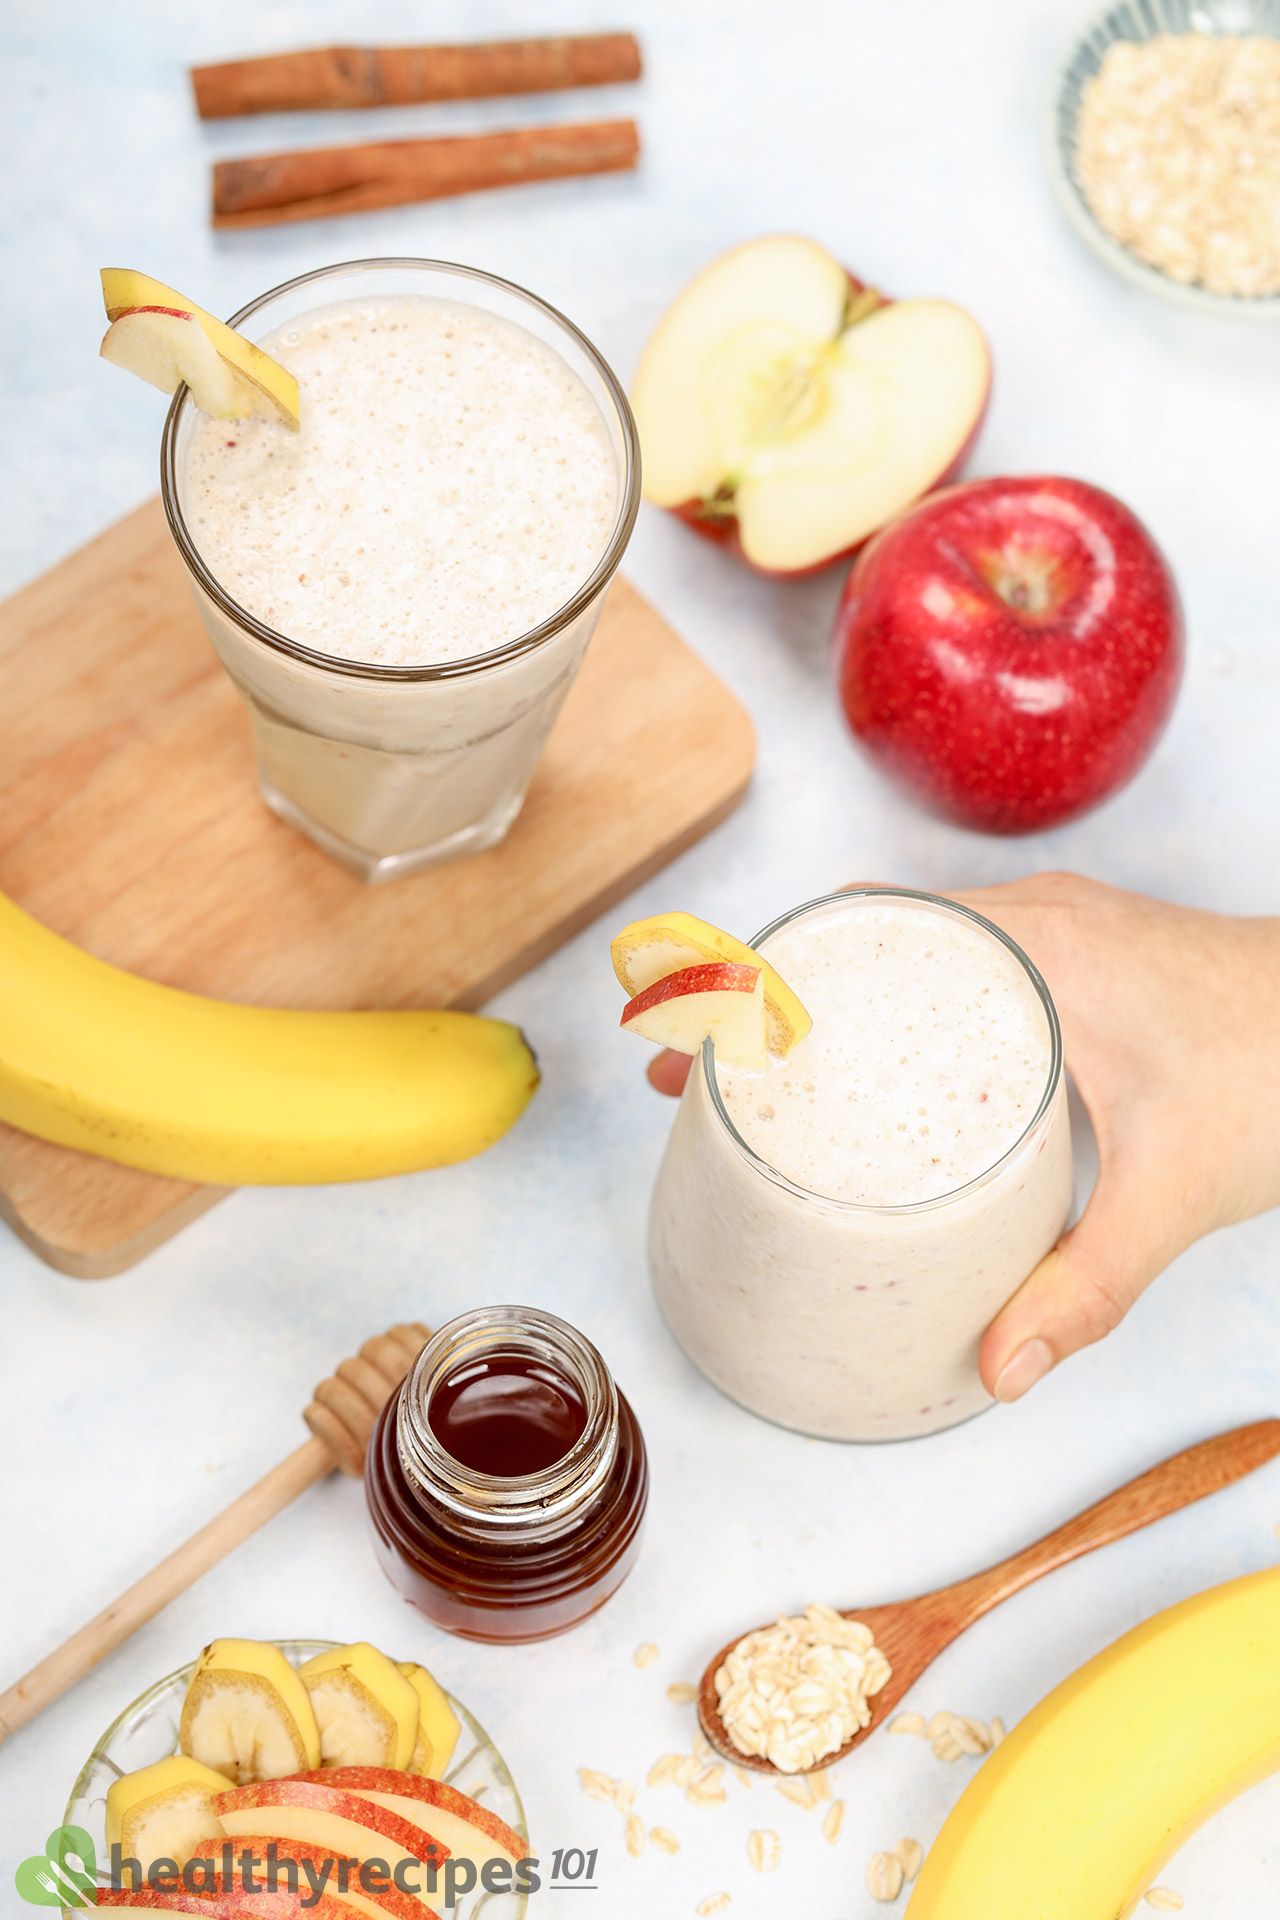 Benefits from Apples, Bananas, and Oats in Apple Pie Smoothie Recipe